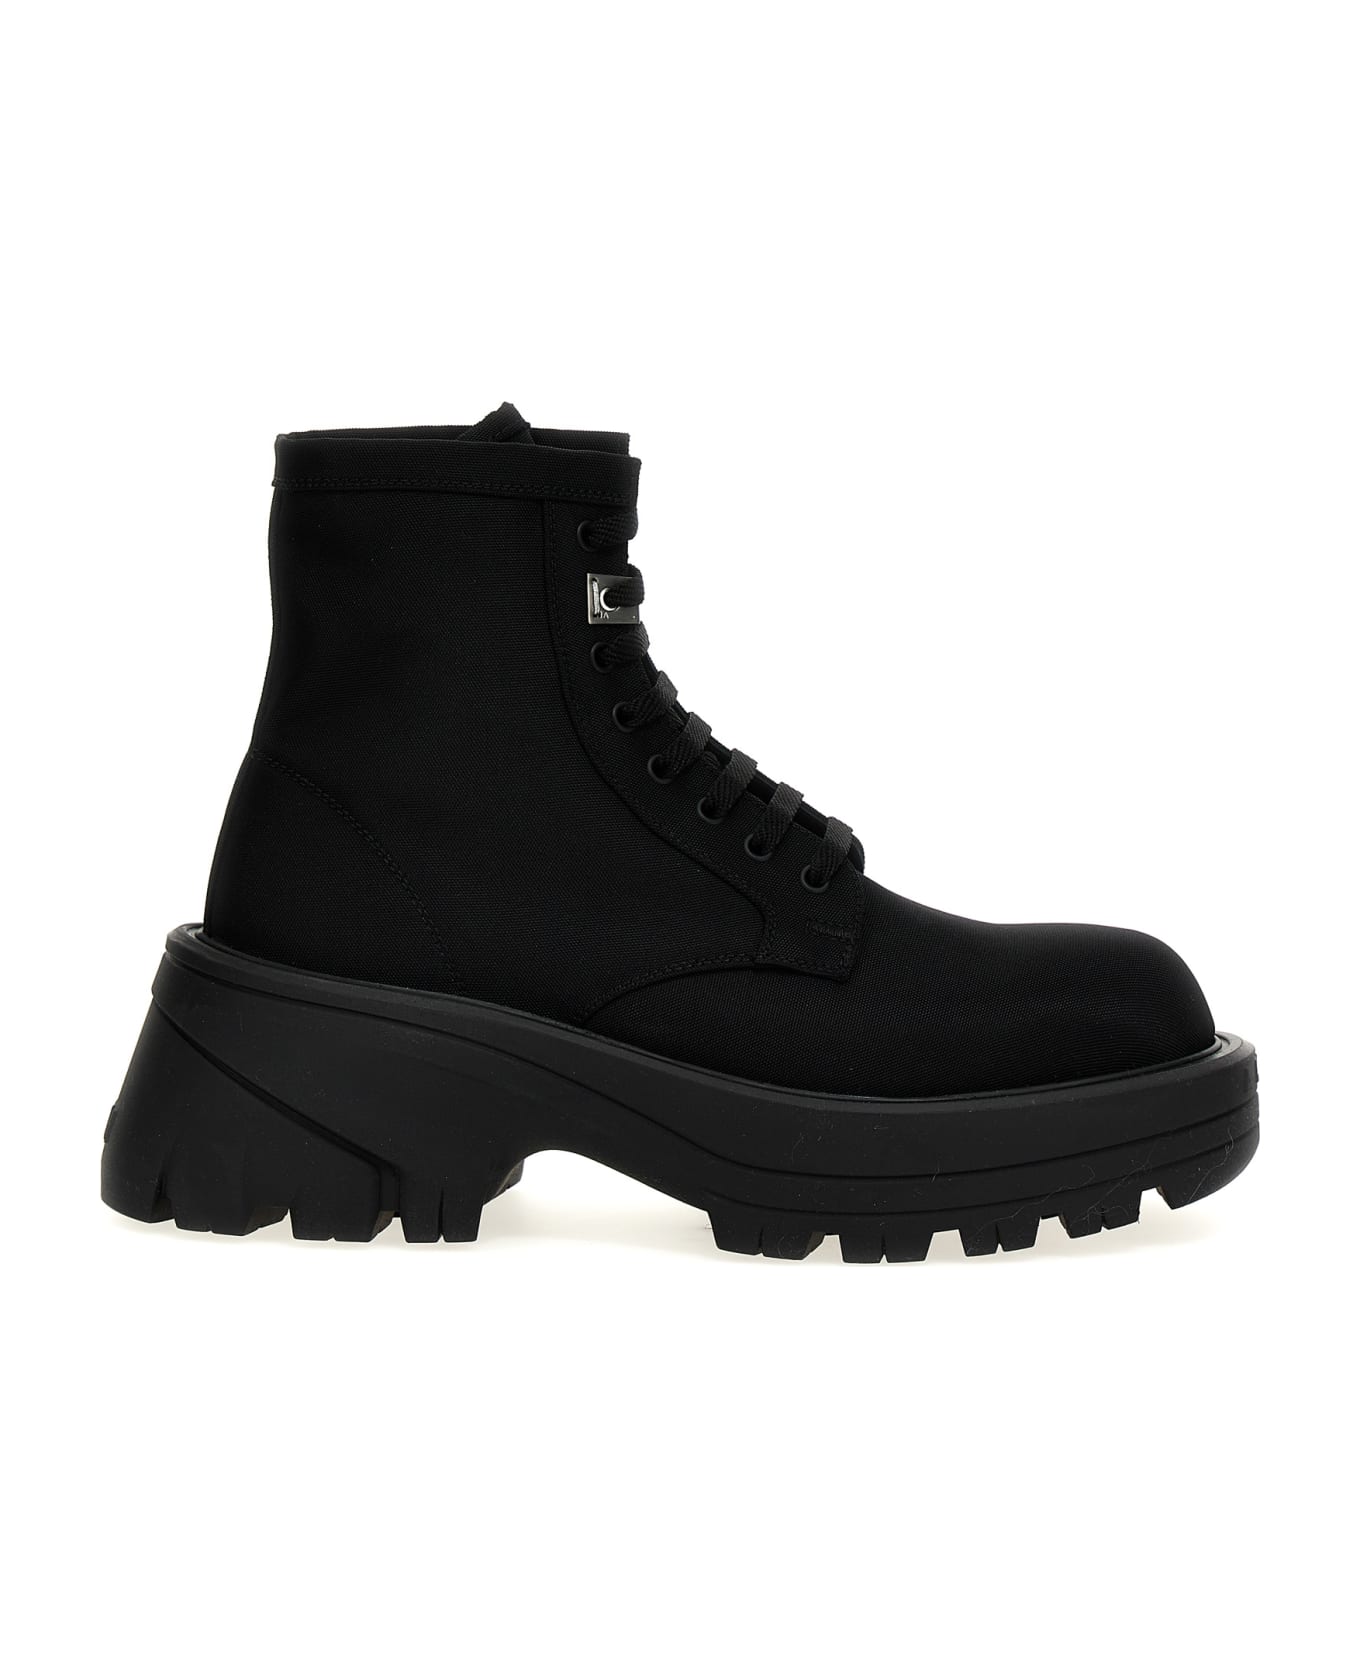 1017 ALYX 9SM 'paraboot' Ankle Boots - Black